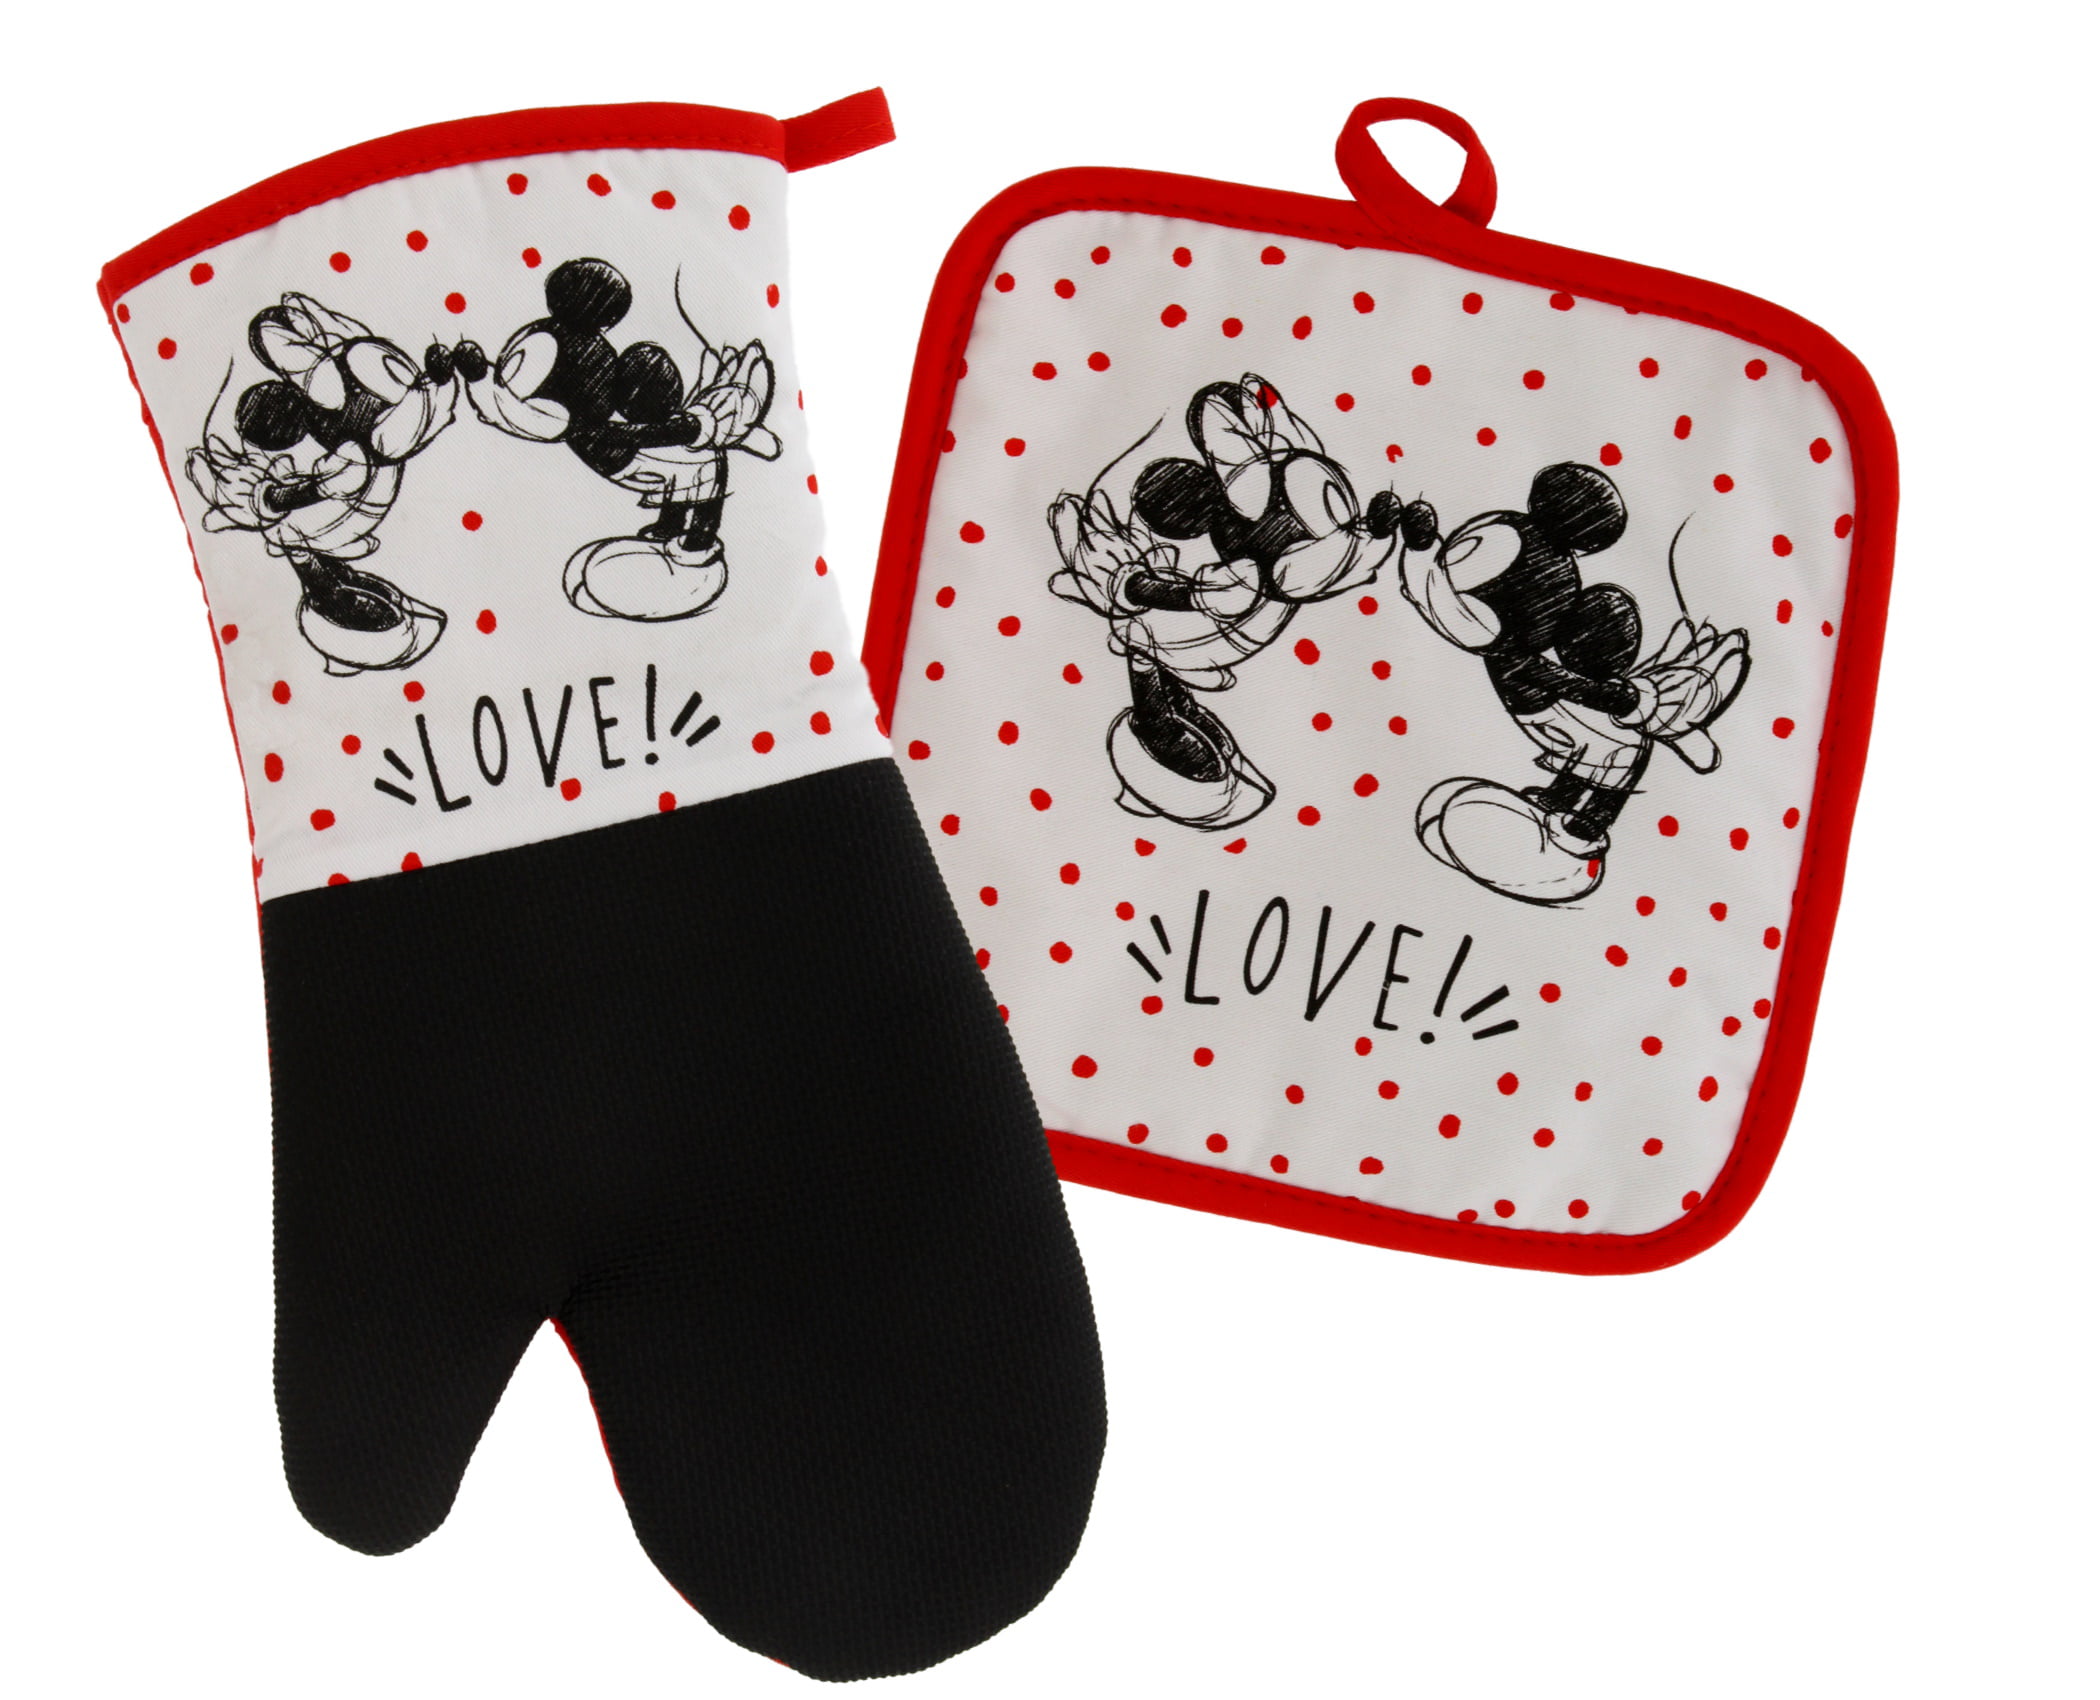 Mickey and Minnie Swing Non-Slip Heat Resistant Kitchen Accessories with Premium Insulation Ideal for Handling Hot Kitchenware Disney Kitchen Neoprene Oven Mitt and Potholder Set with Hanging Loop